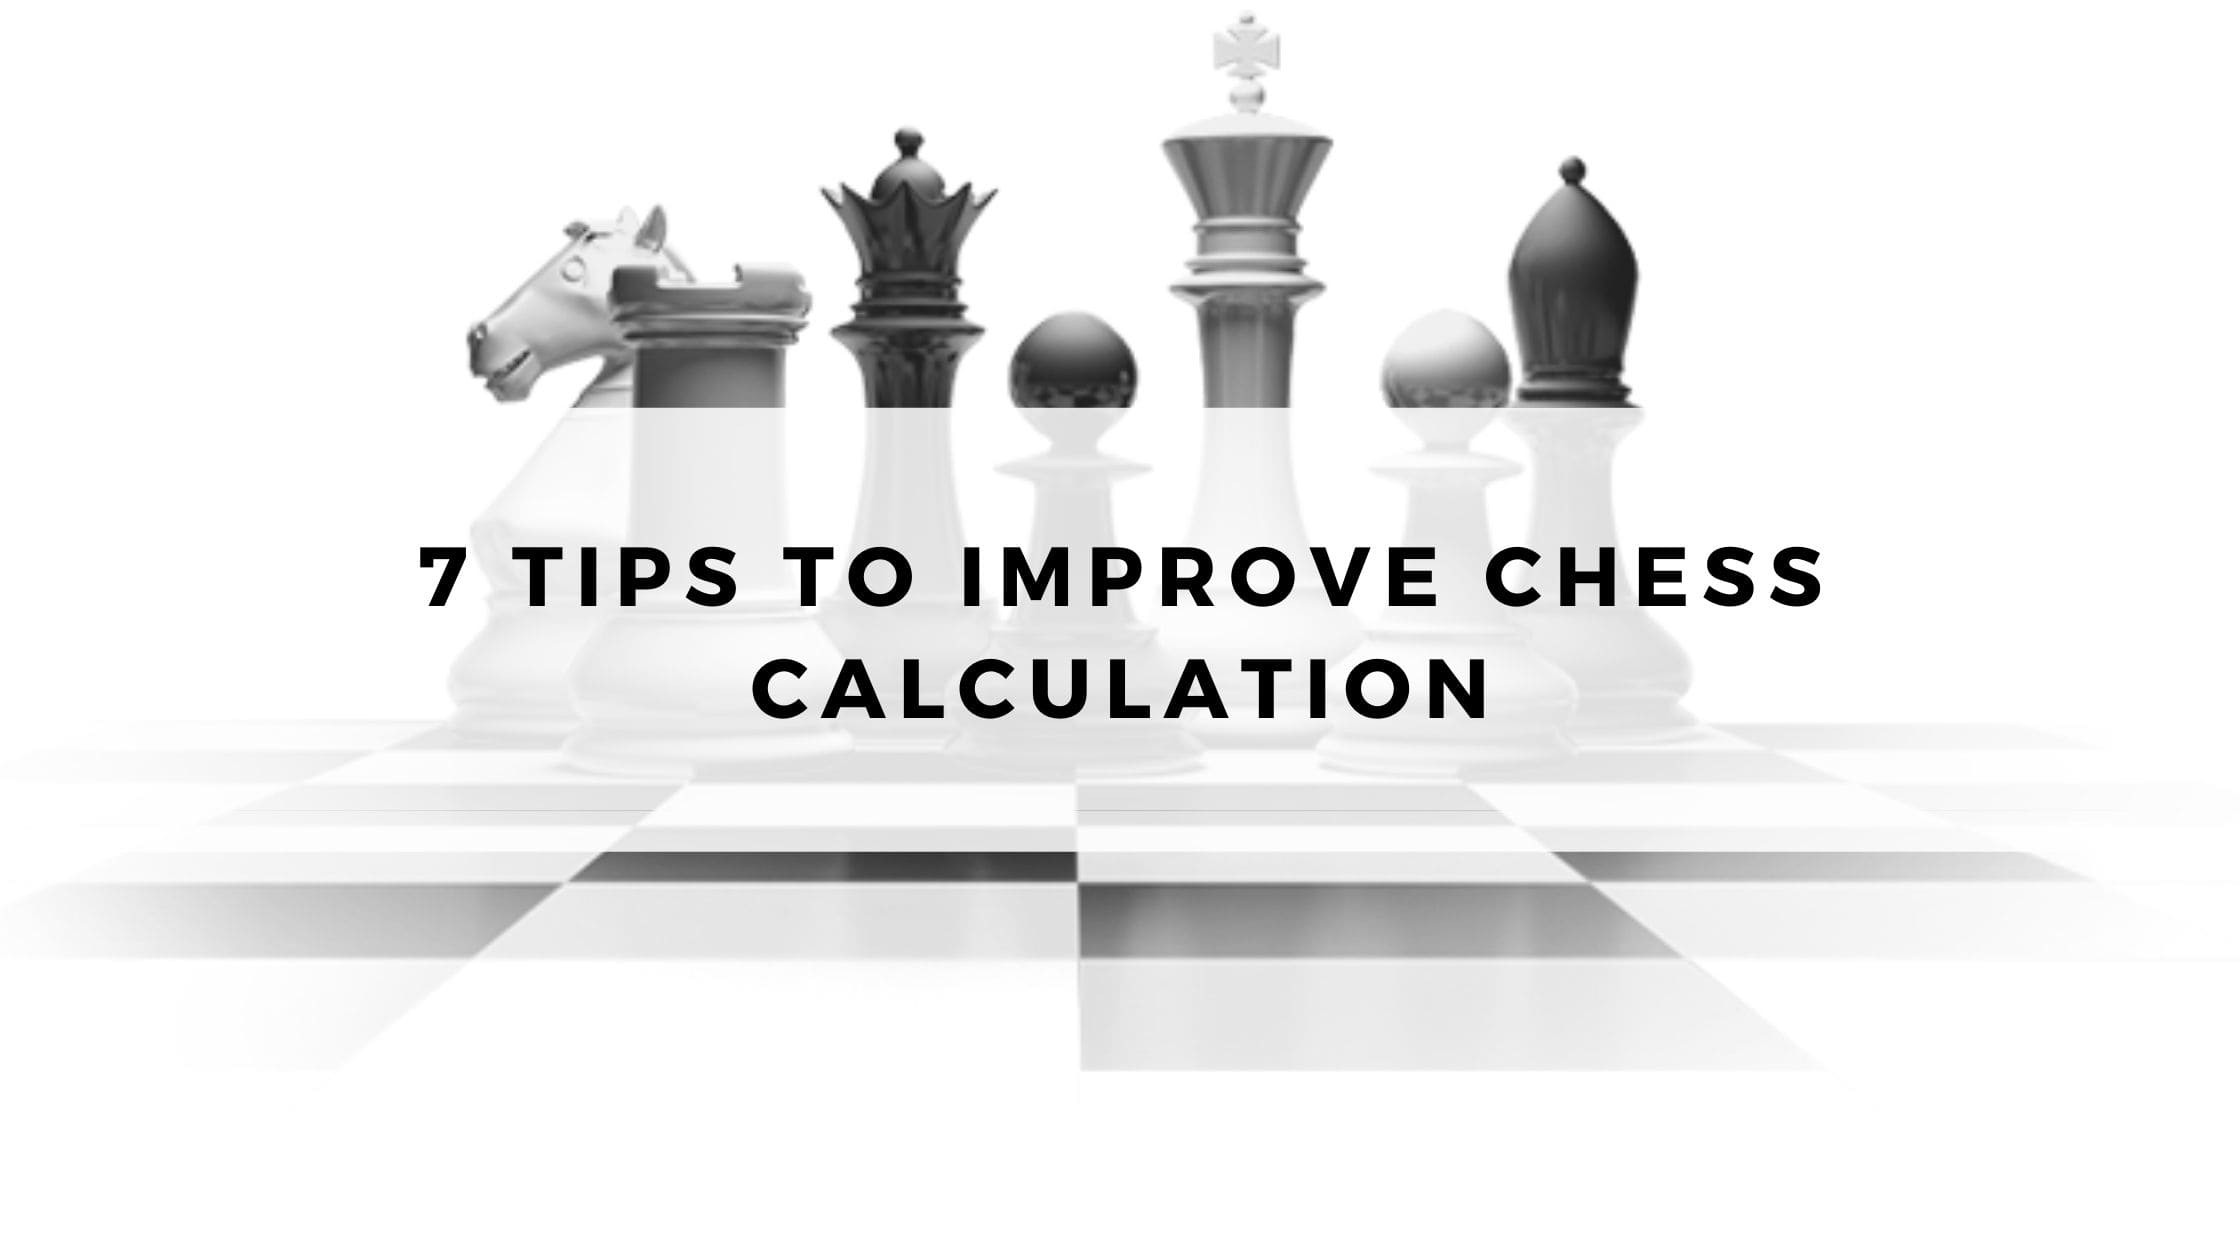 7 Tips to Improve Chess Calculation